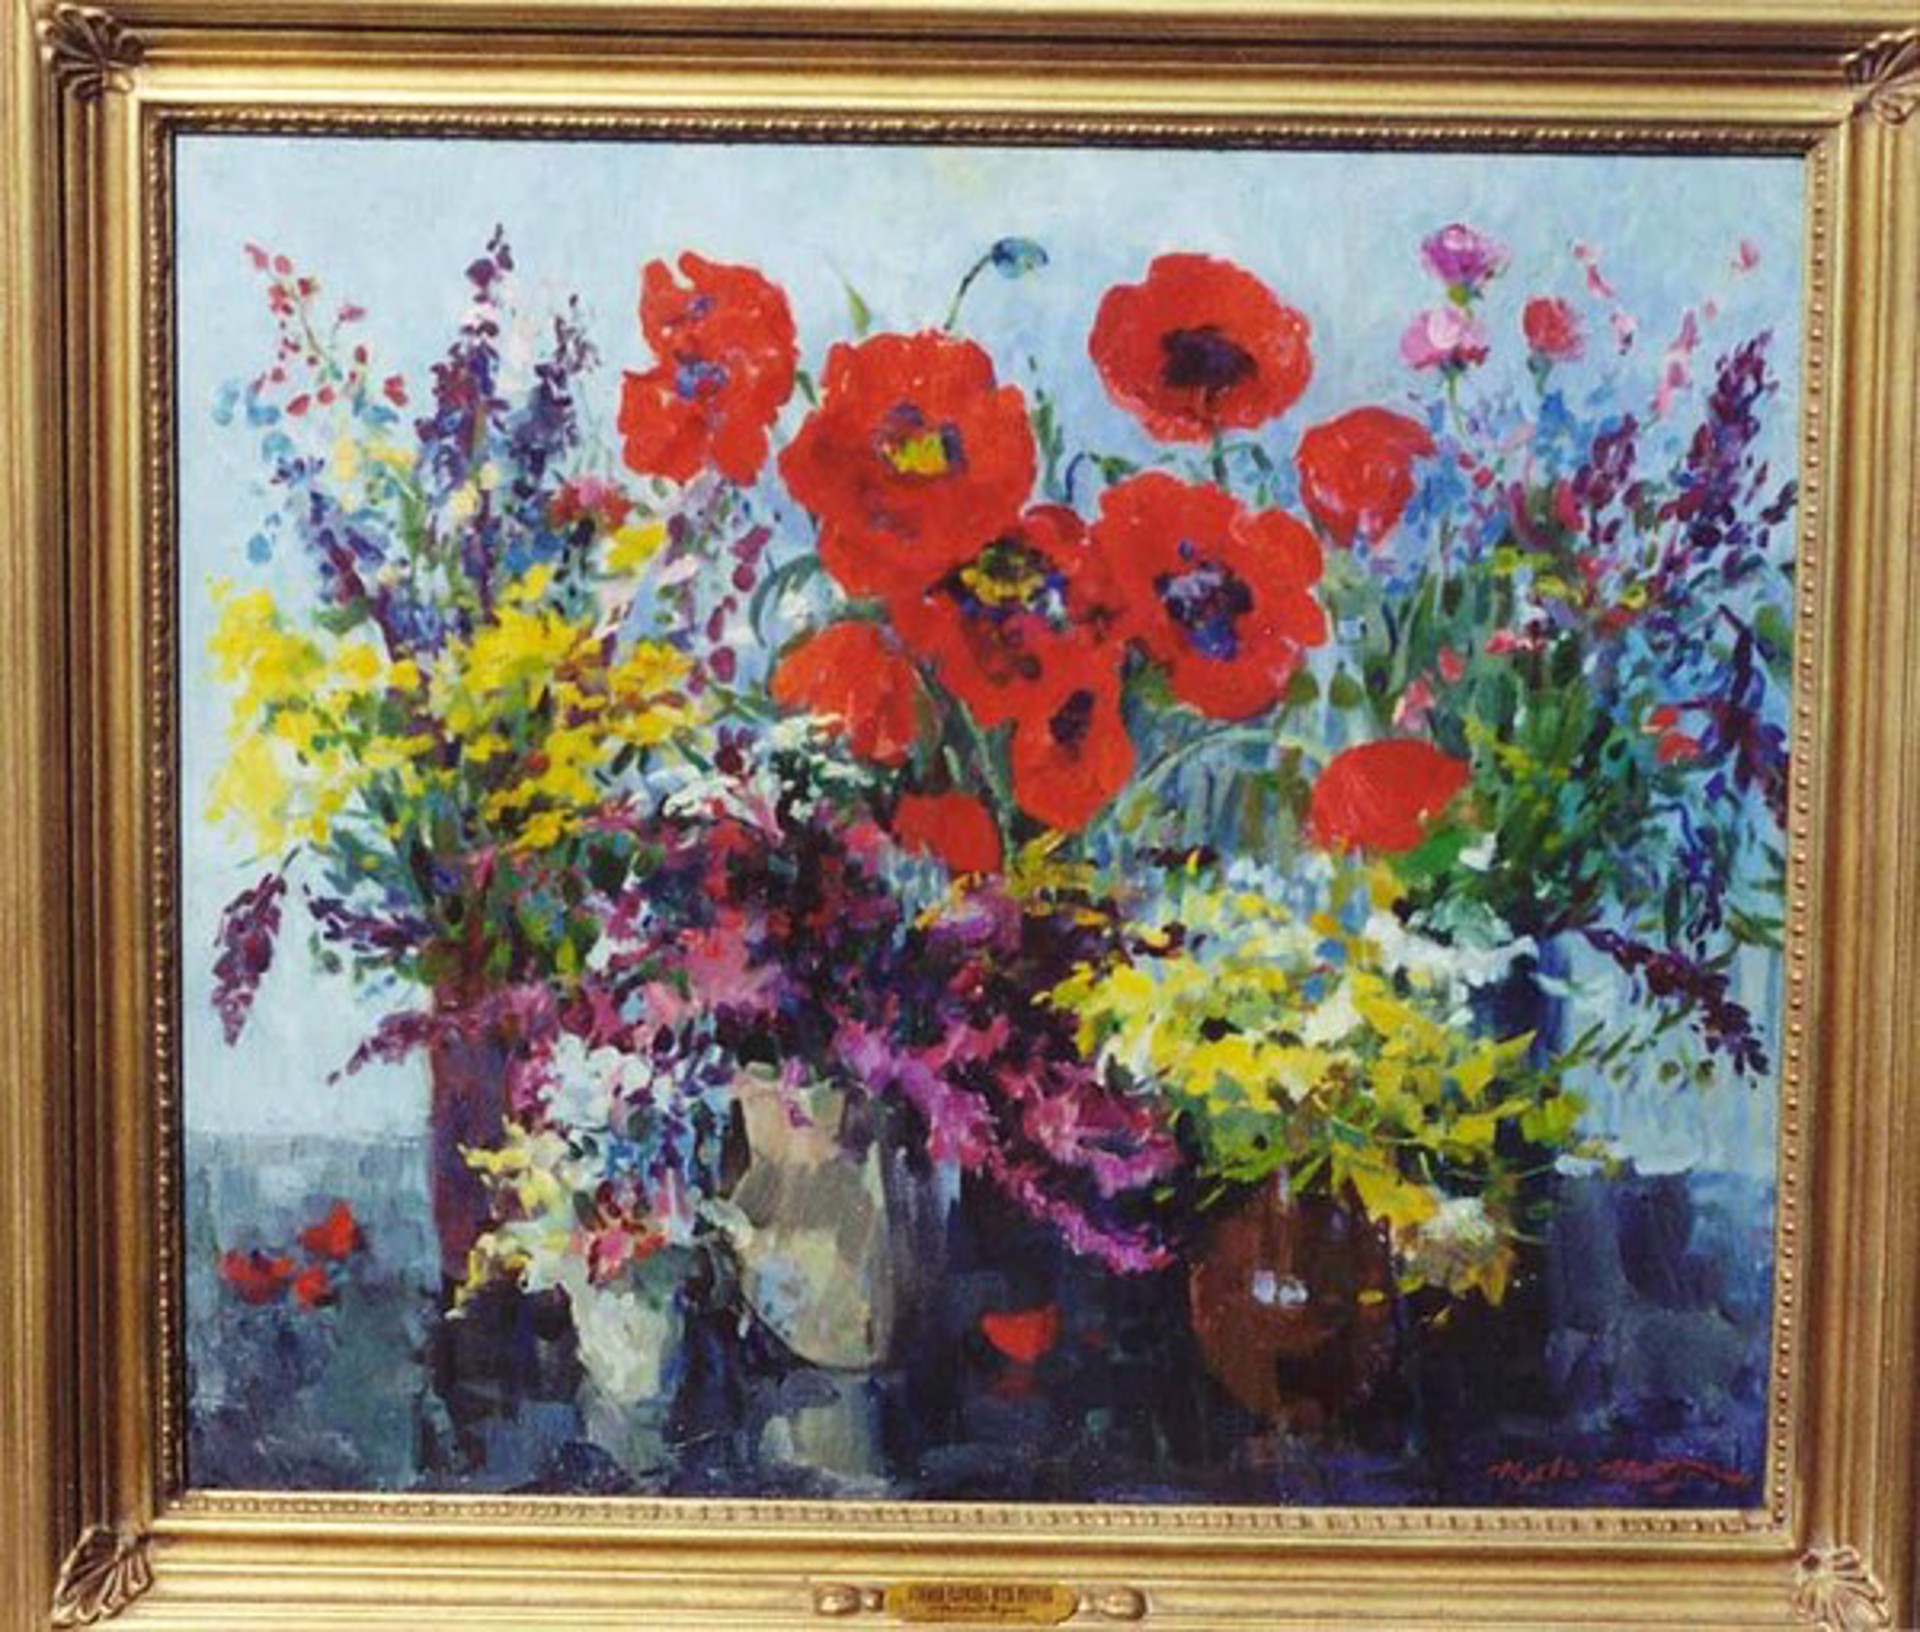 Summer Flowers with Poppies by Armen Atoyan